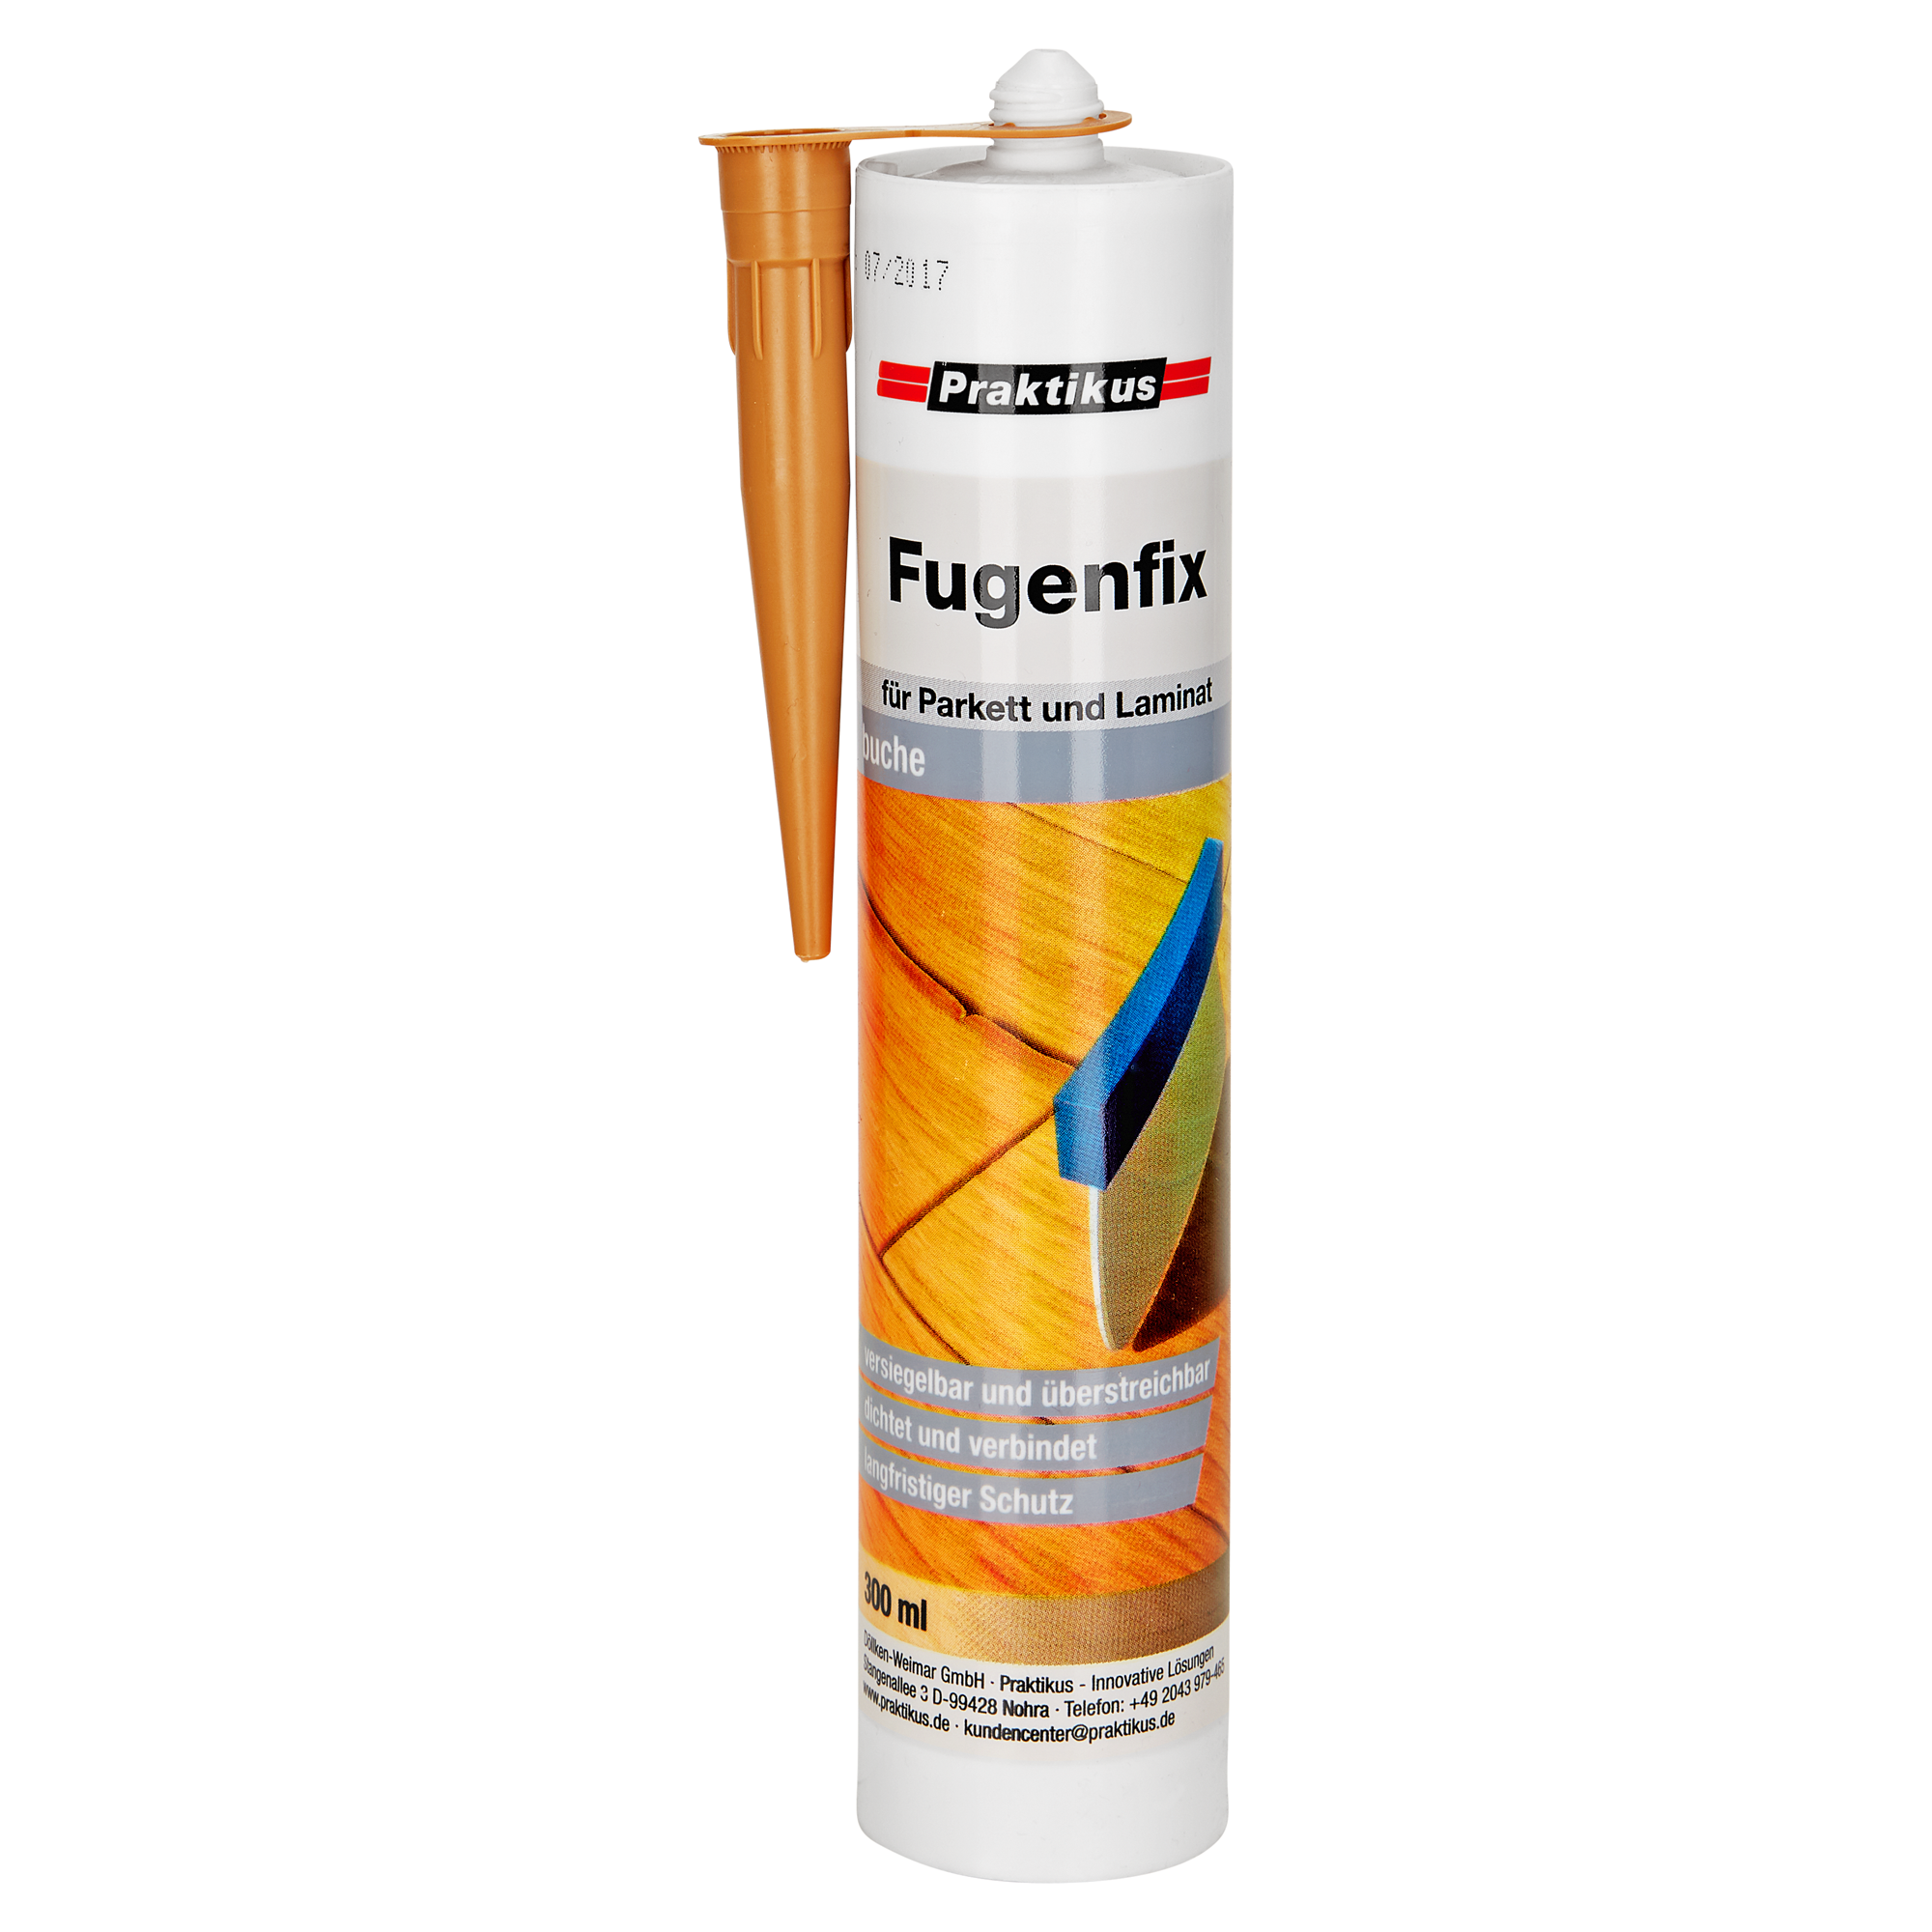 Fugenfix Buche 300 ml + product picture